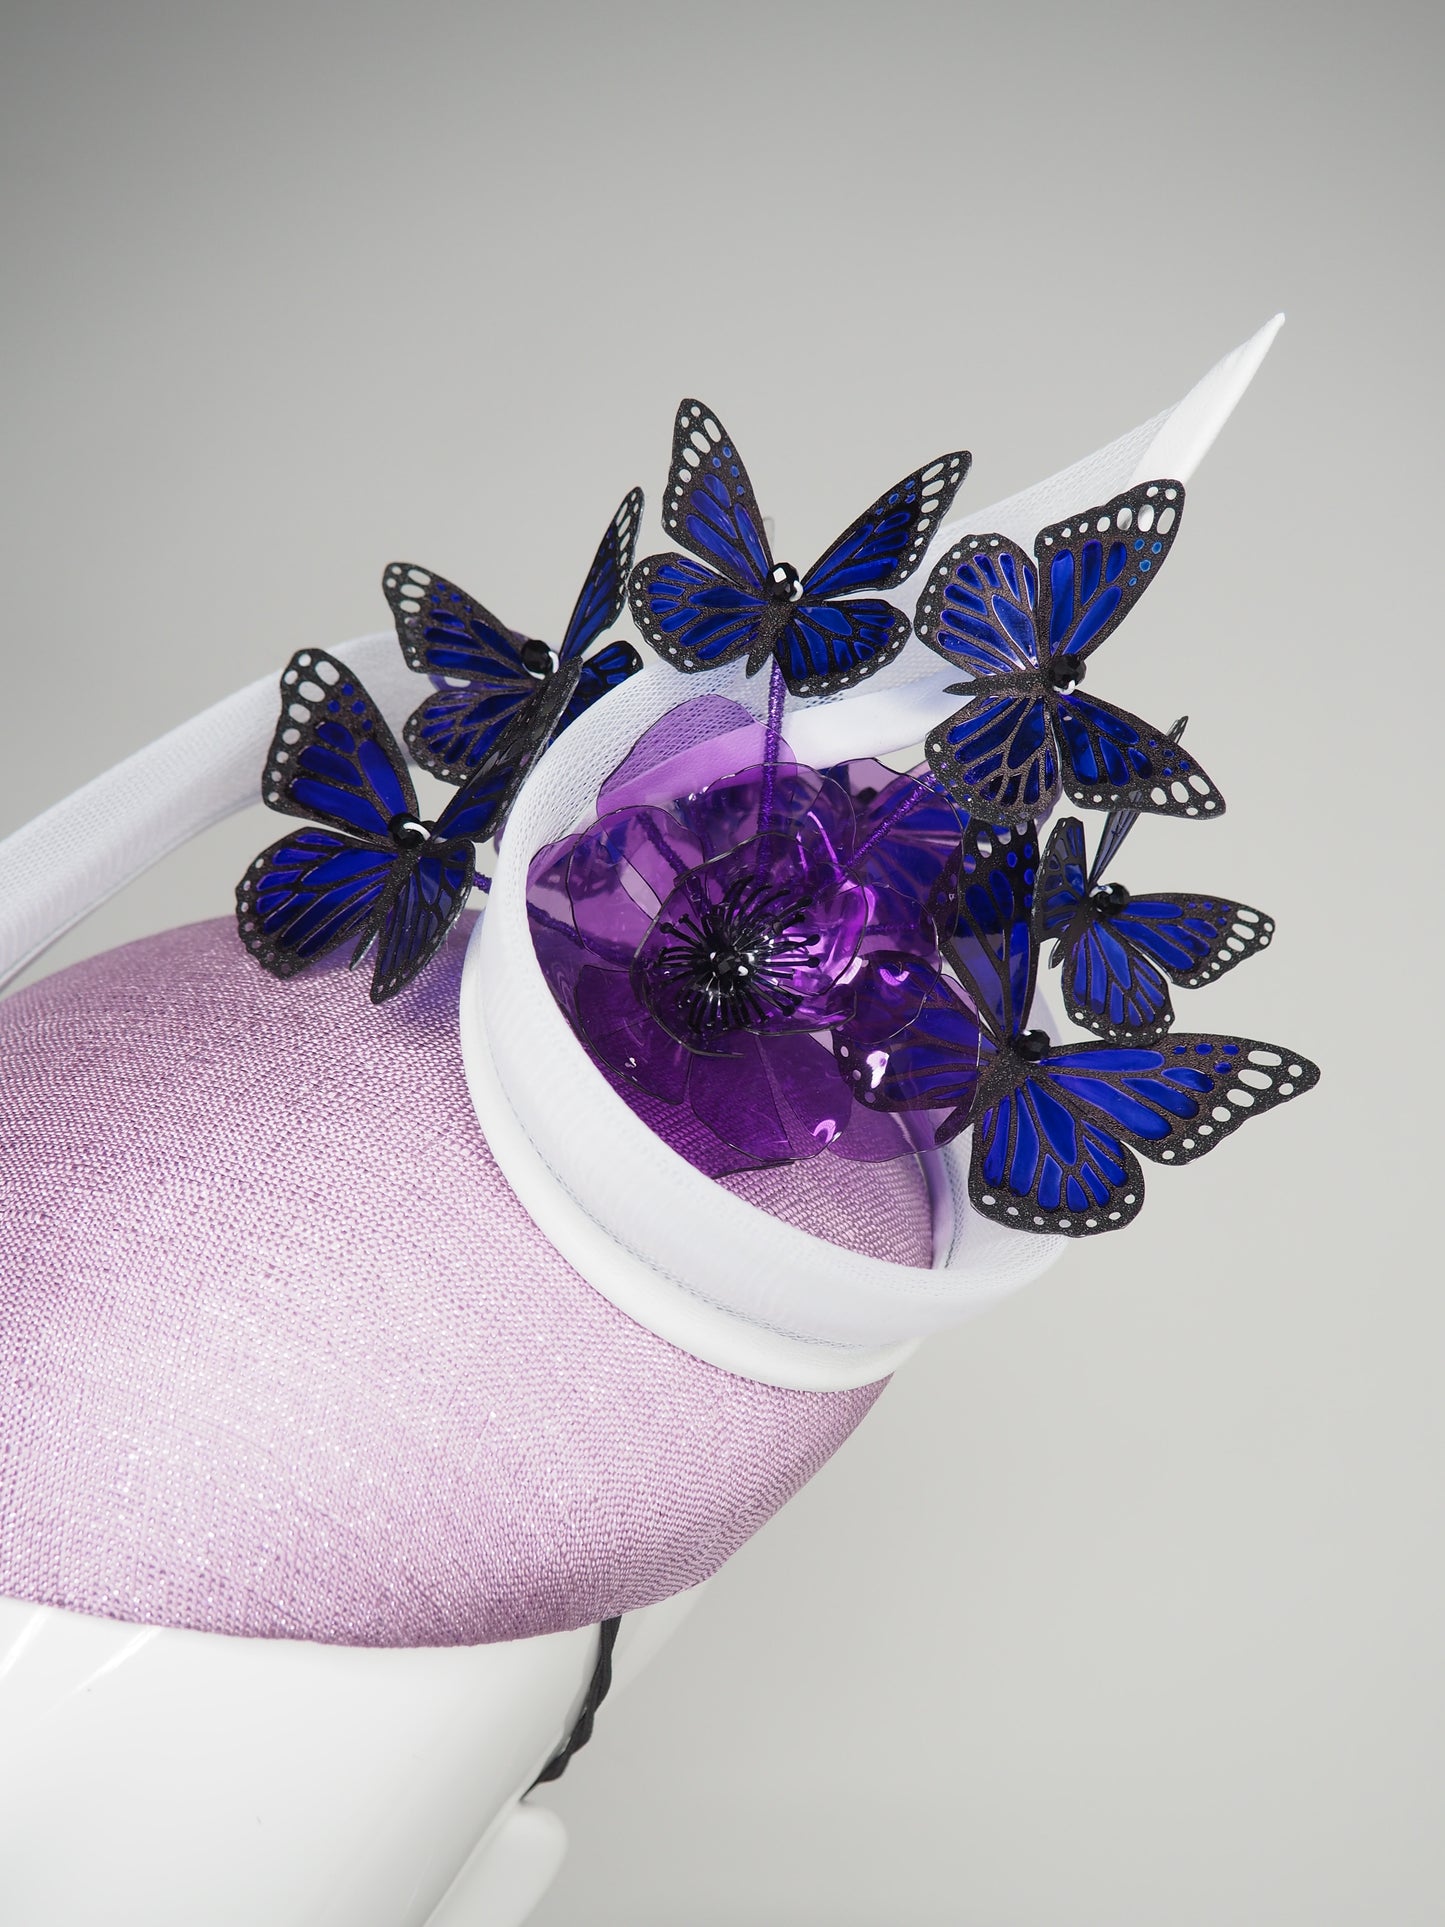 Butterfly Bloom - Hand painted indigo butterflies on a facehugger base with a purple crystoform bloom